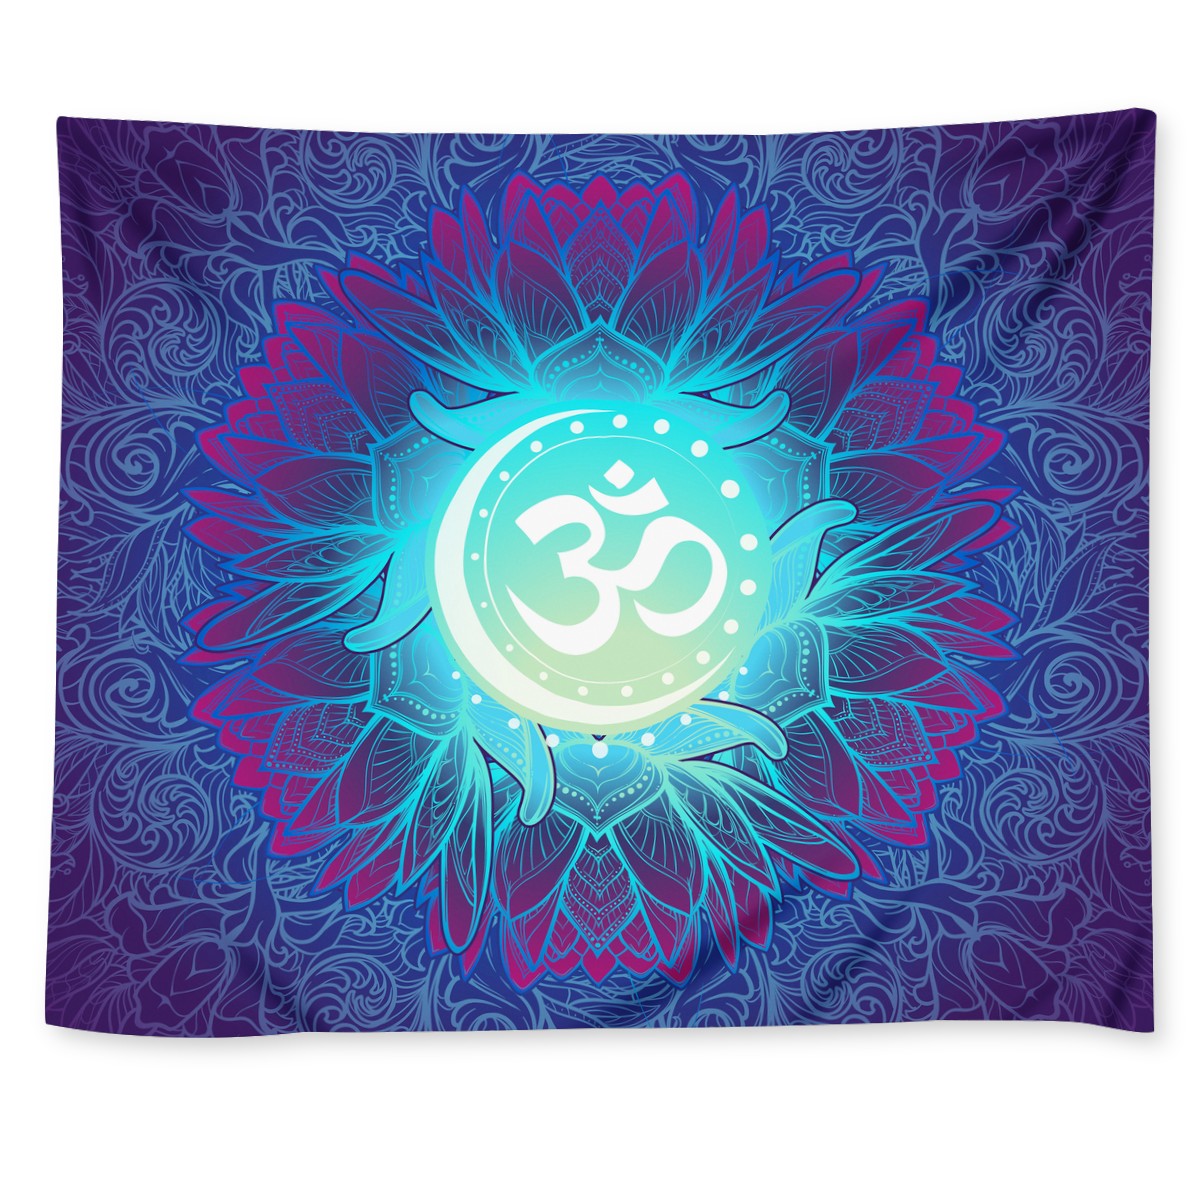 Om Sacred Mantra Wall Tapestry